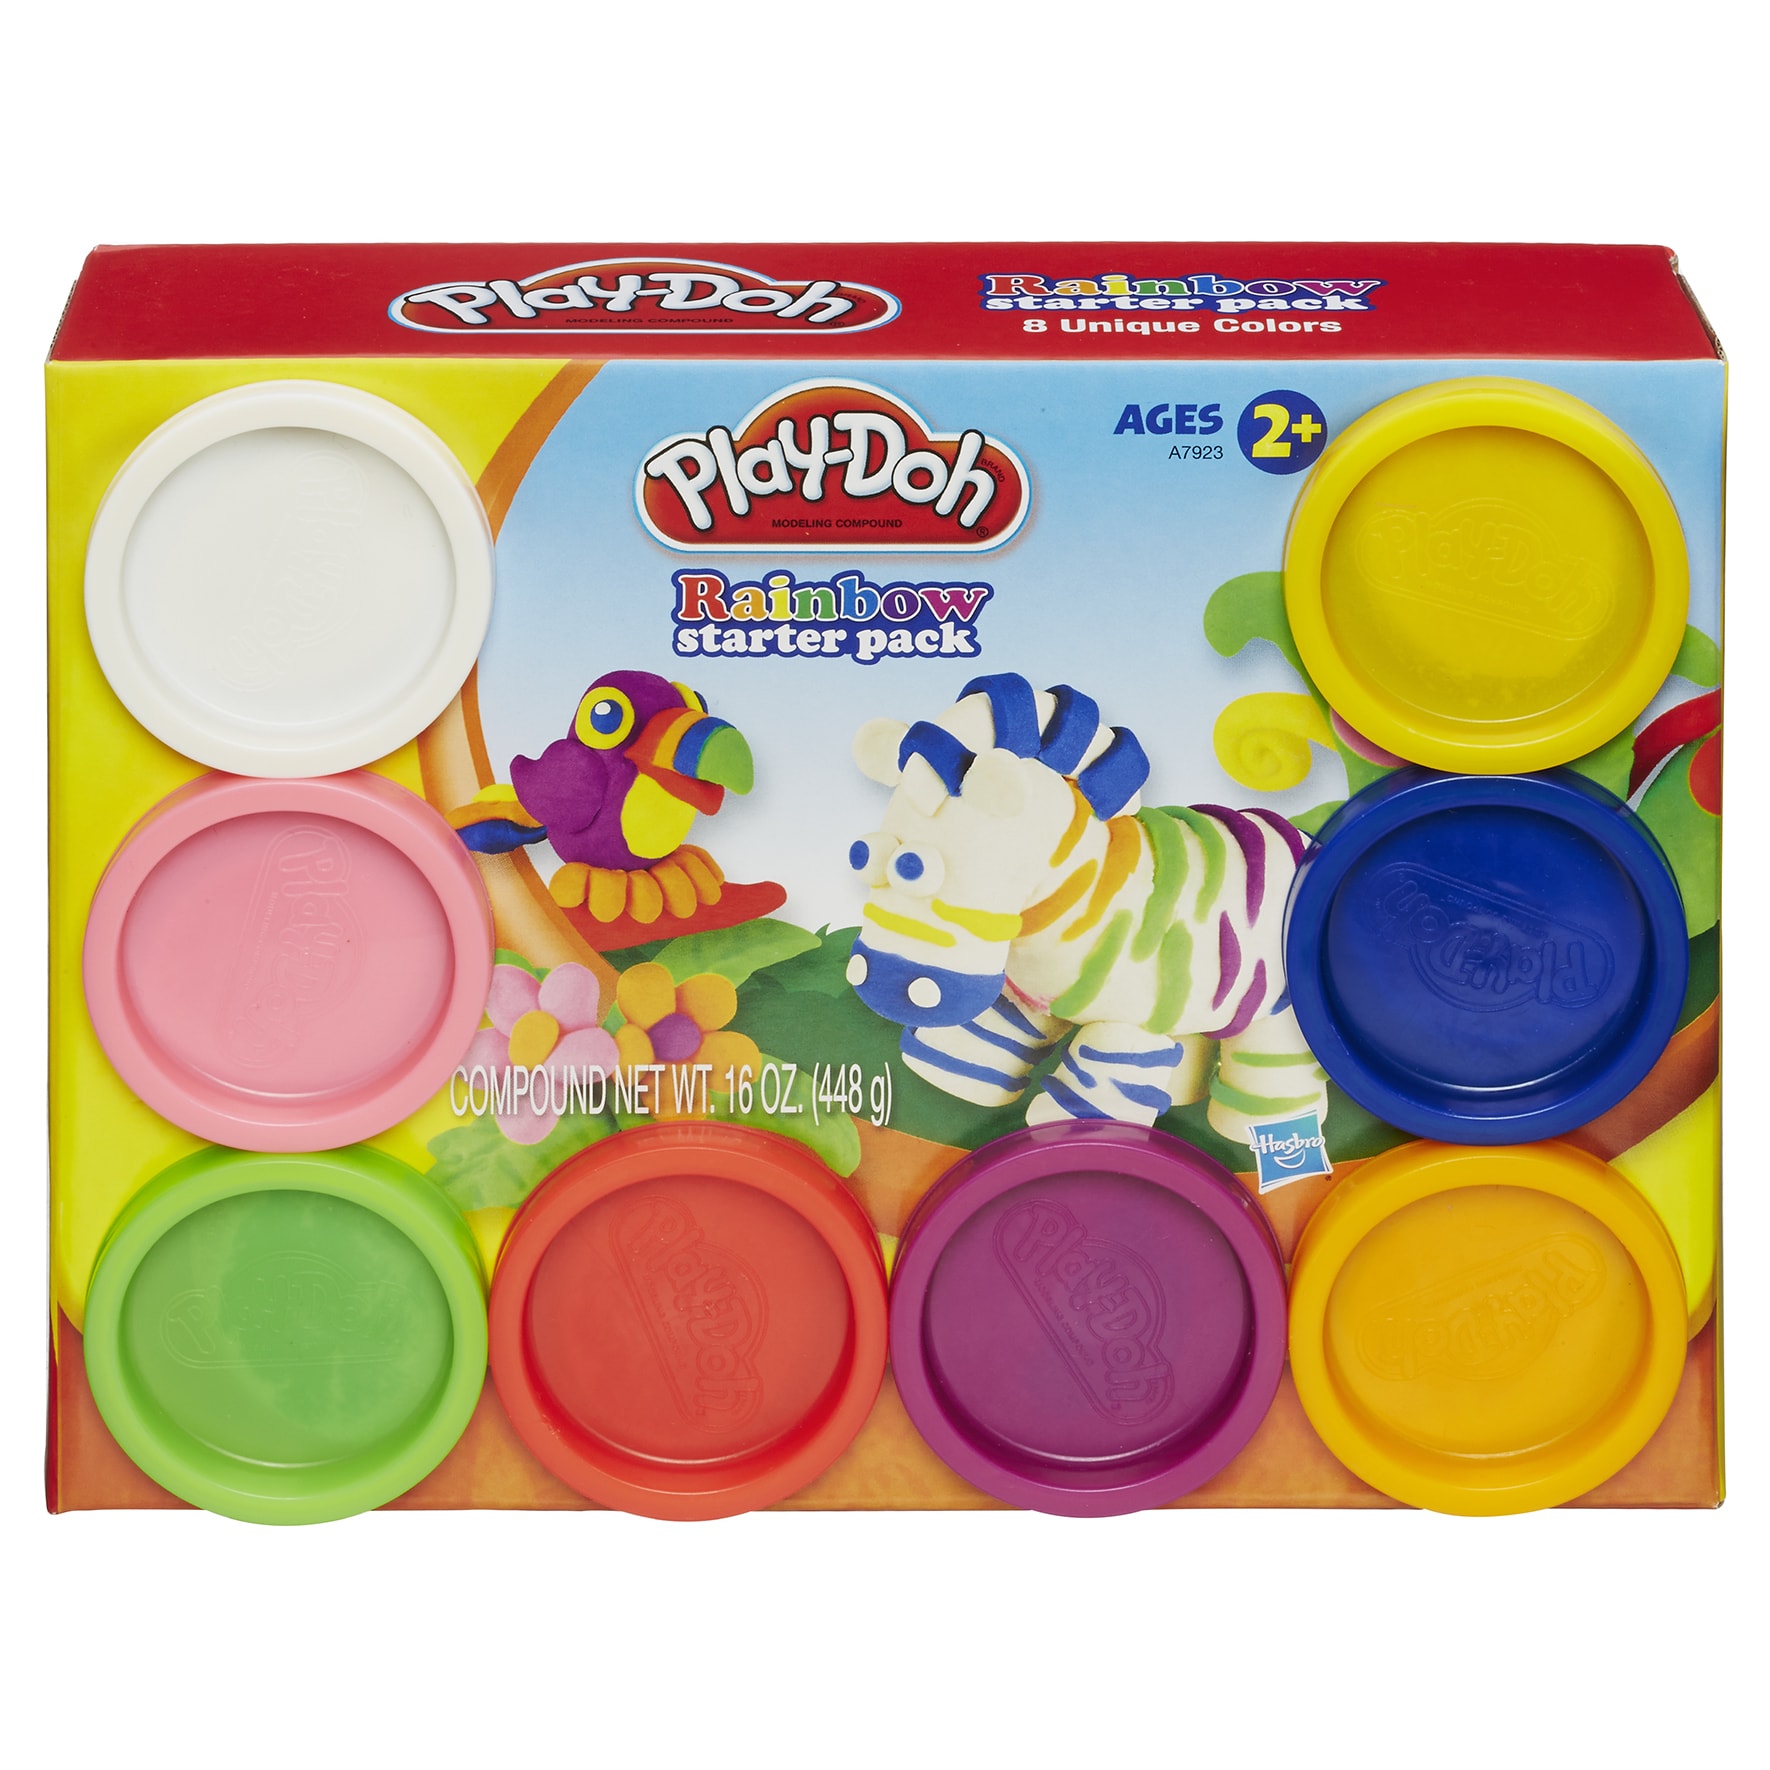 Play-Doh Rainbow Starter Pack with 8 Cans of Play-Doh, 16 oz - image 2 of 2